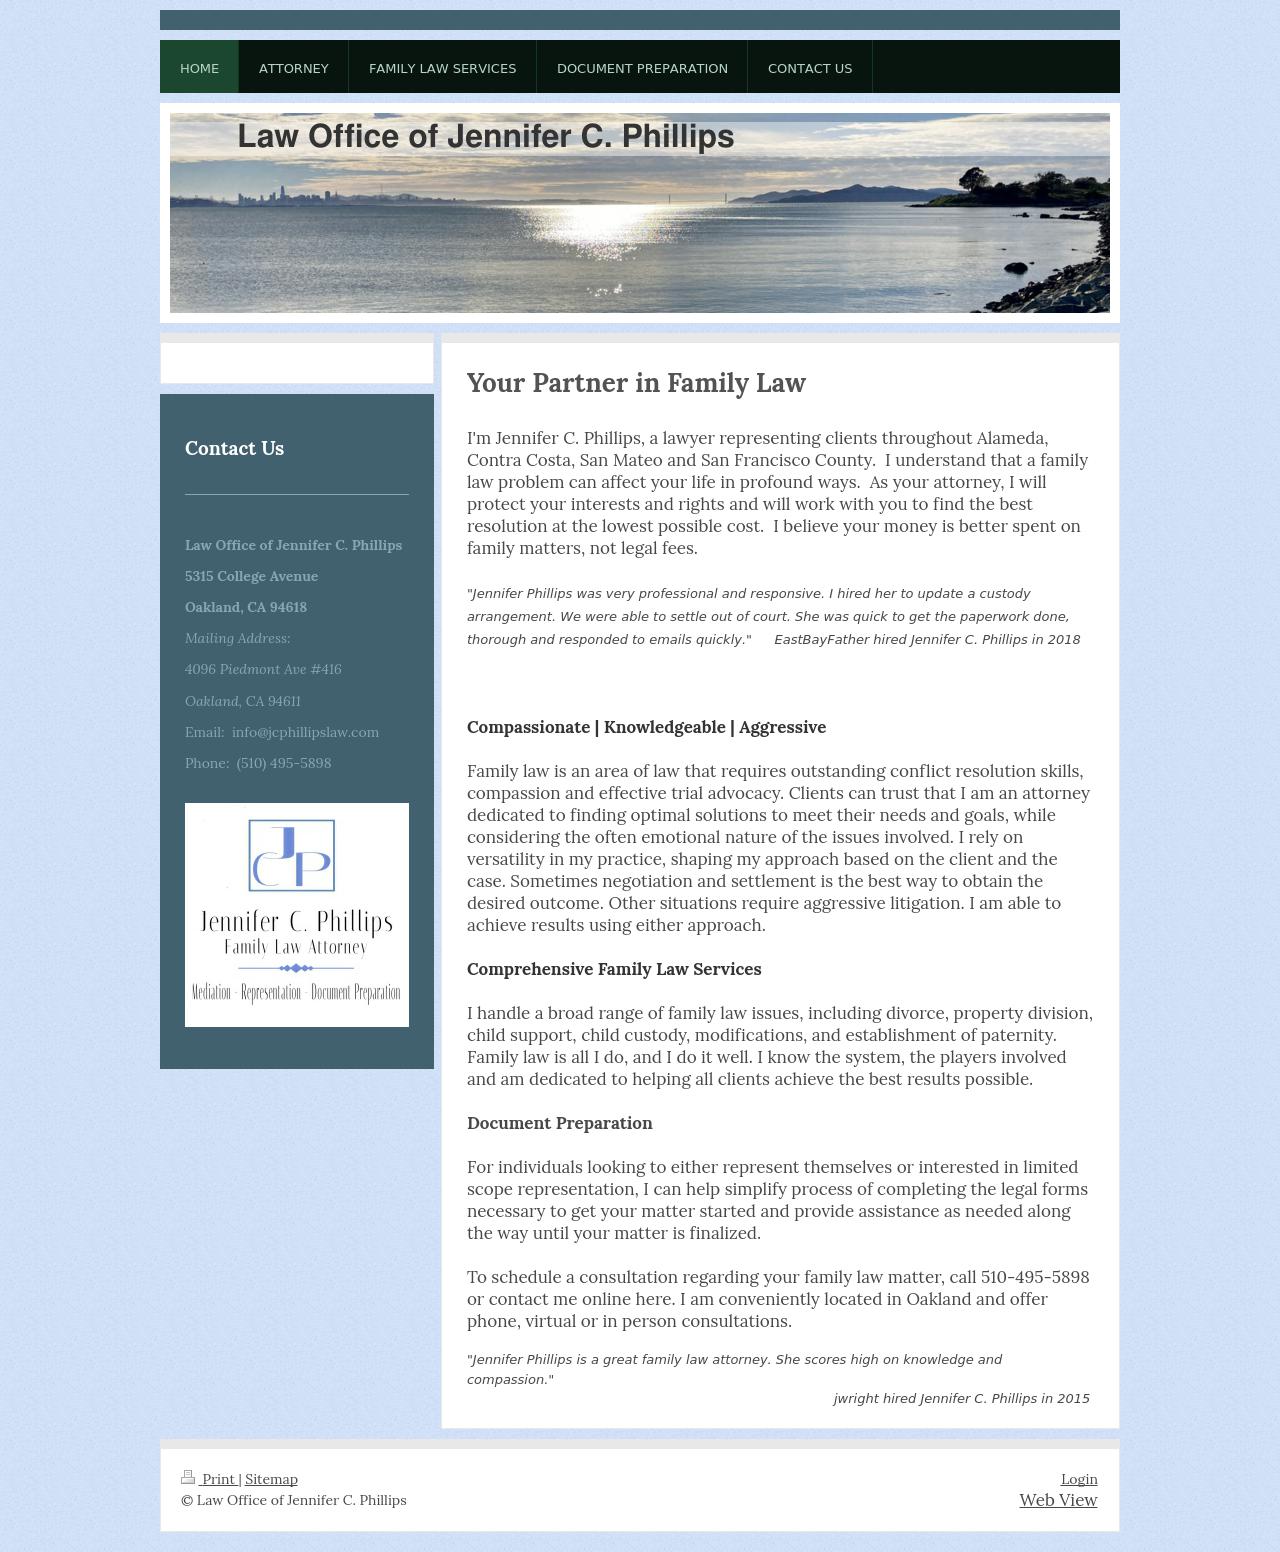 Law Offices of Jennifer C. Phillips - Oakland CA Lawyers